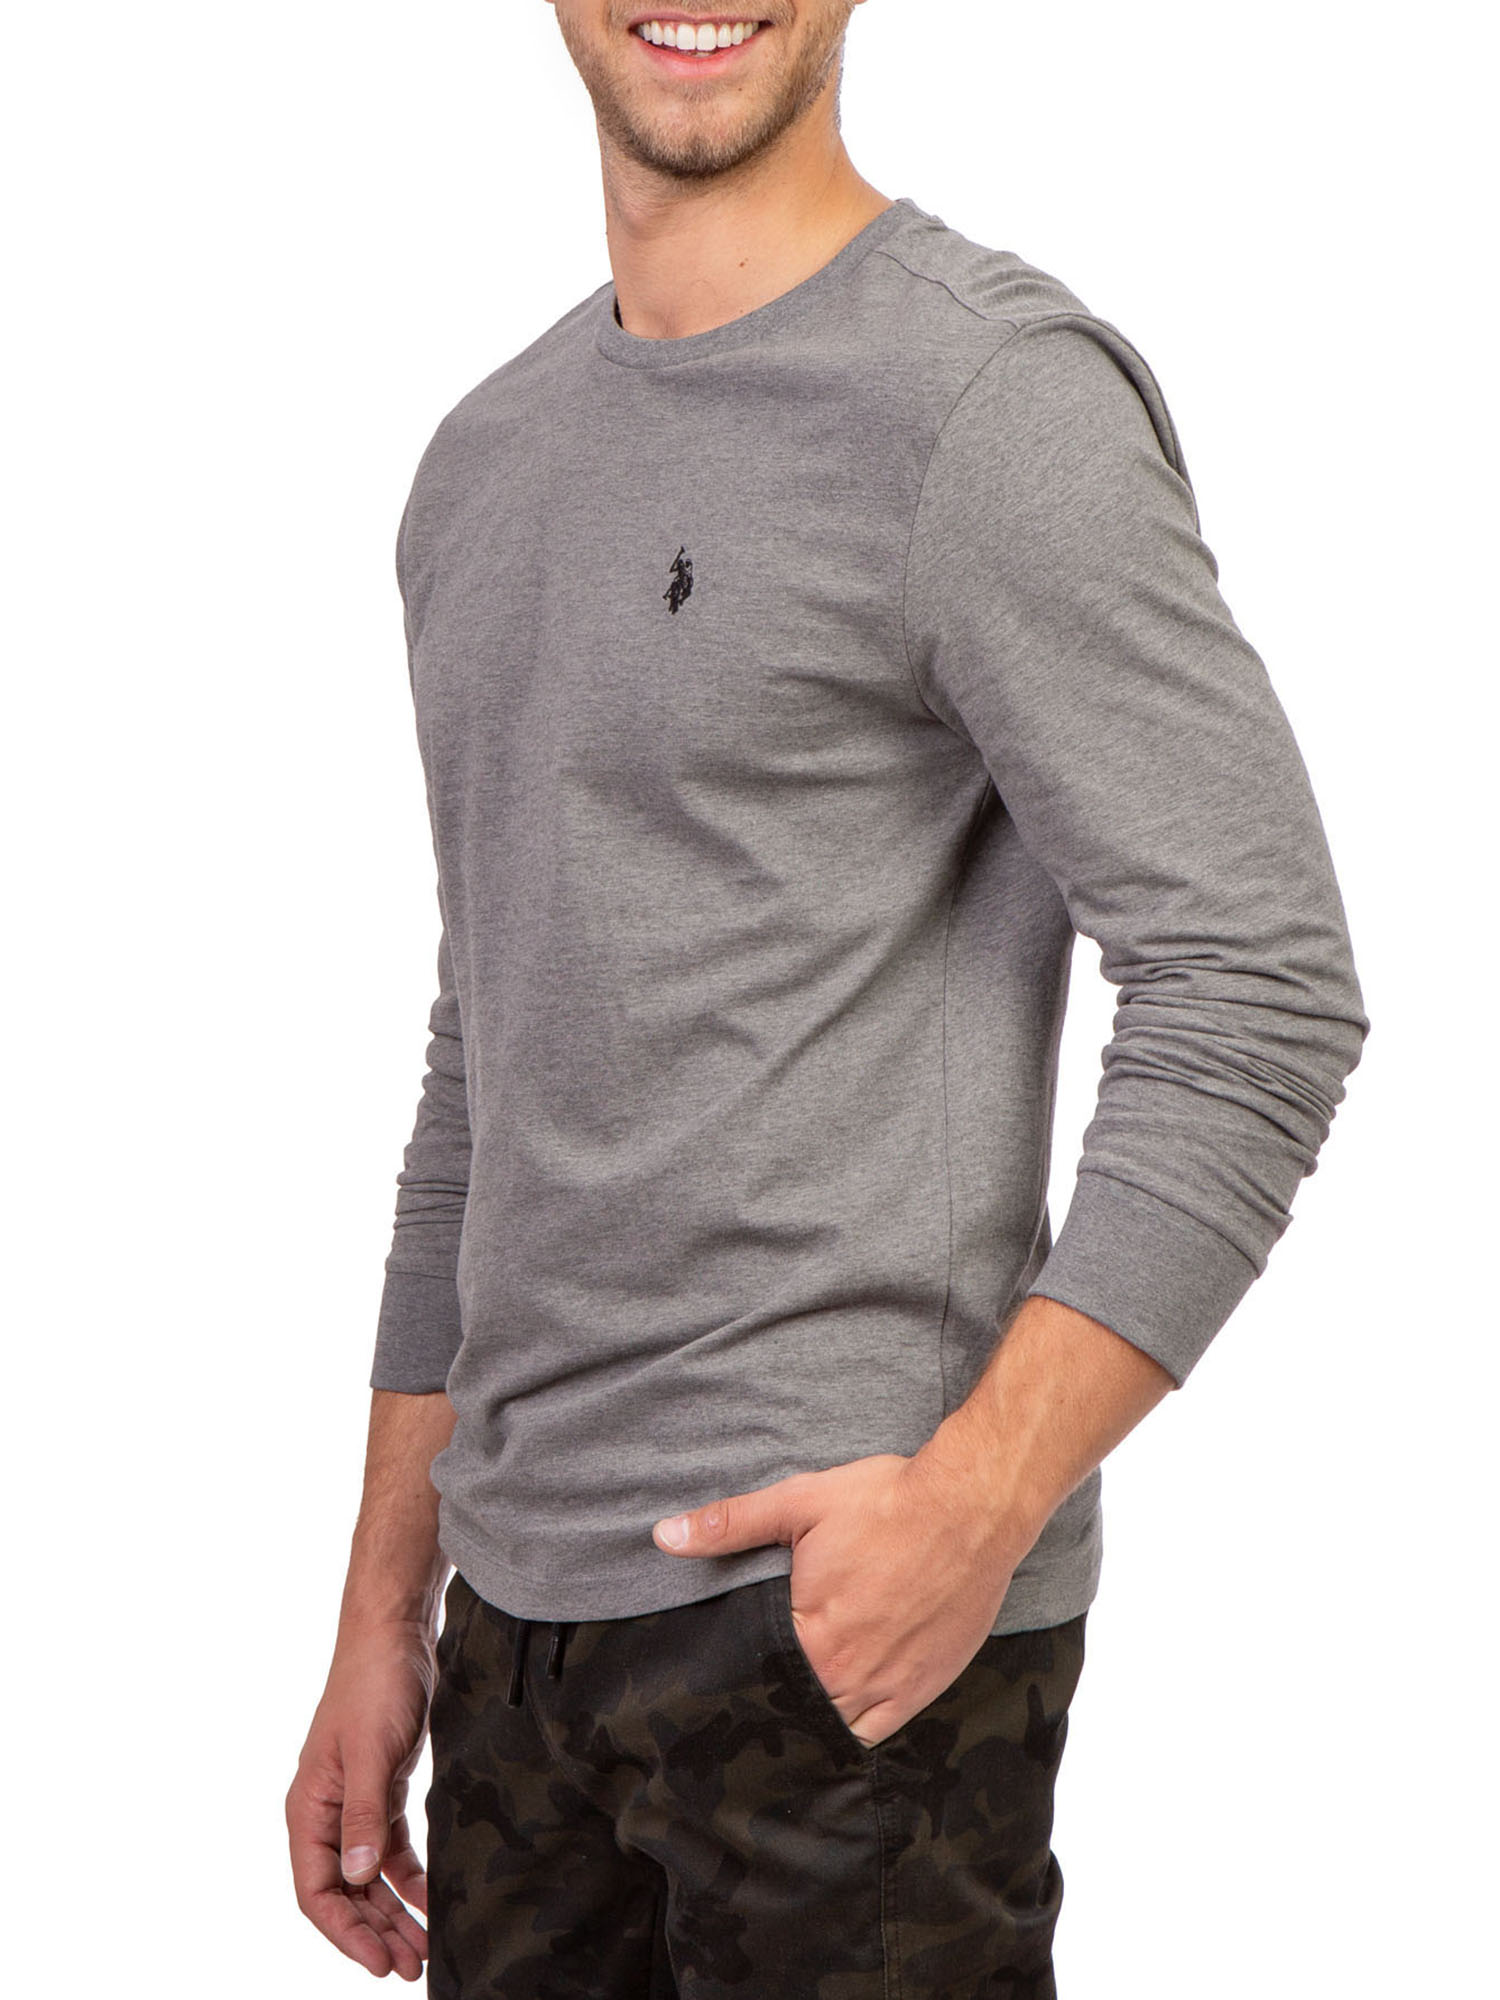 U.S. Polo Assn. Men's Long Sleeve Solid T-Shirt - image 2 of 4